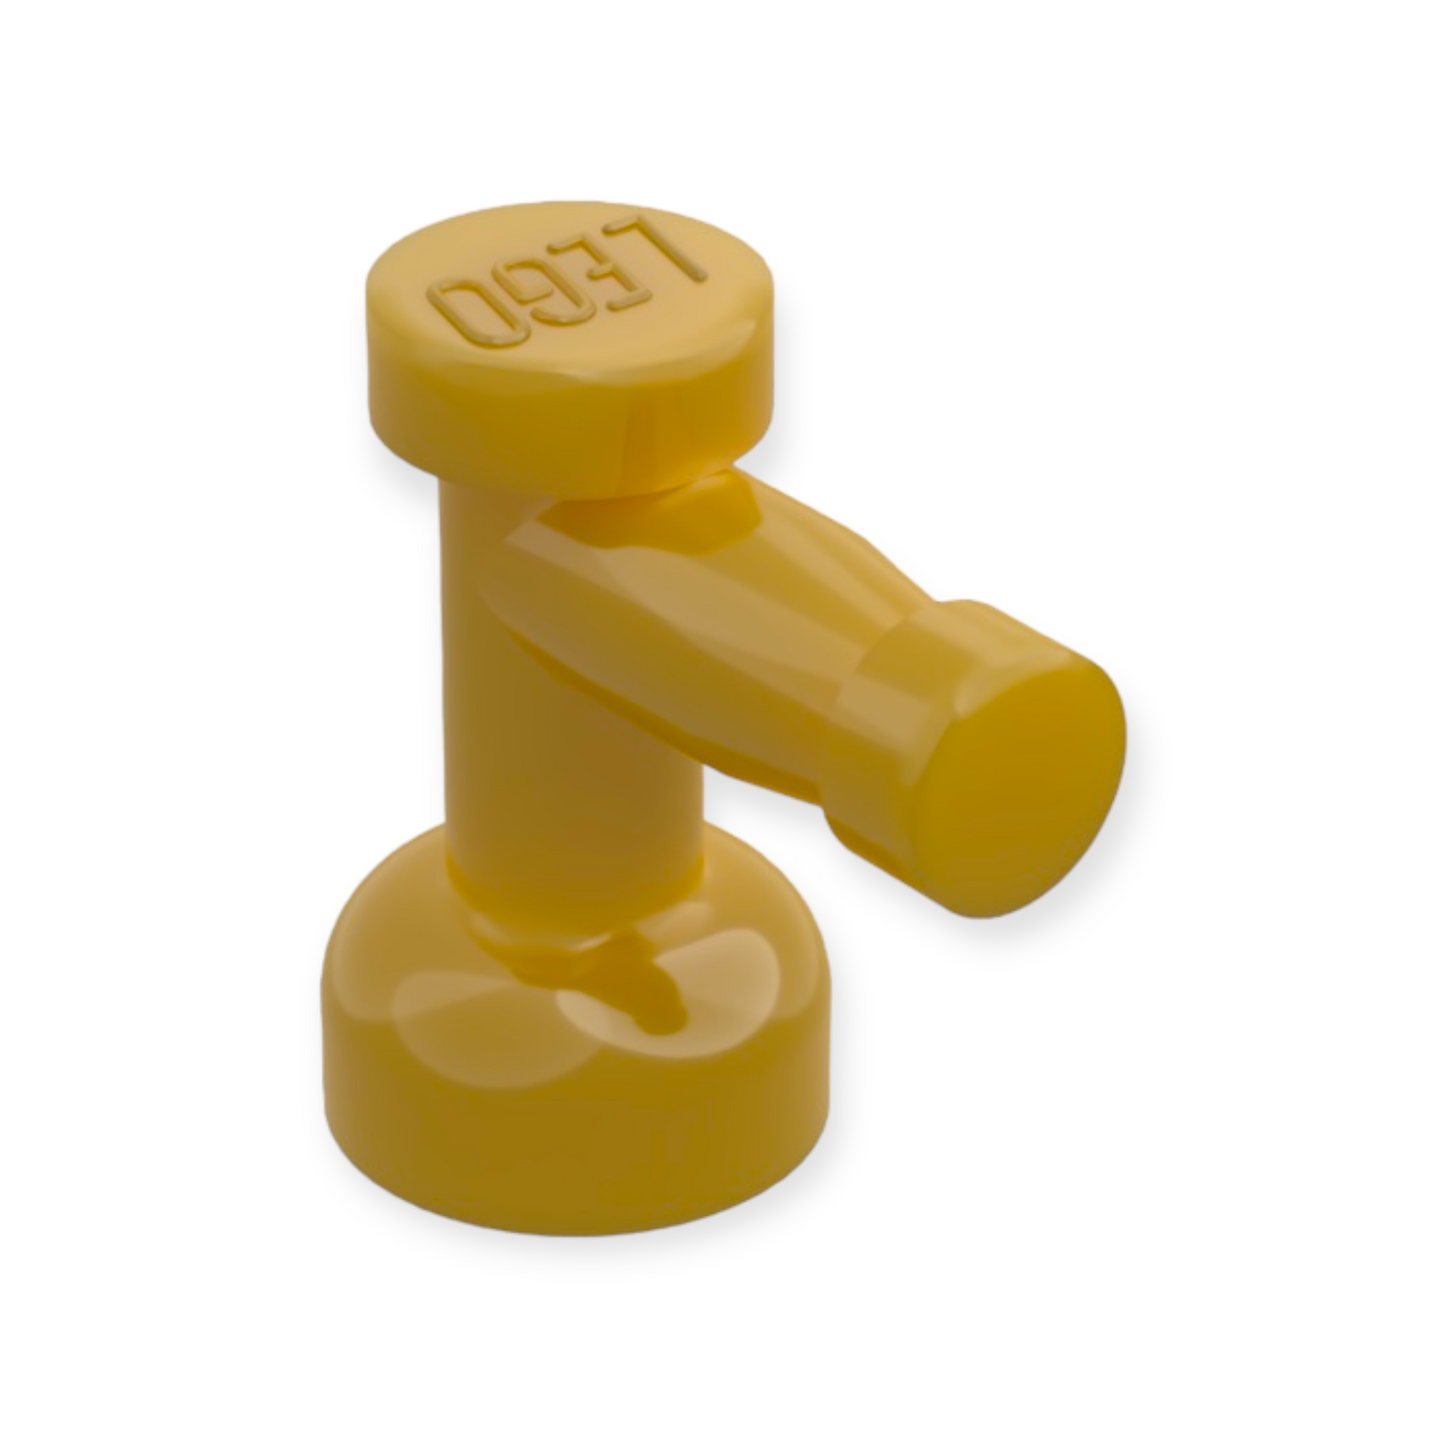 LEGO Tap 1x1 without Hole in Nozzle End - Pearl Gold